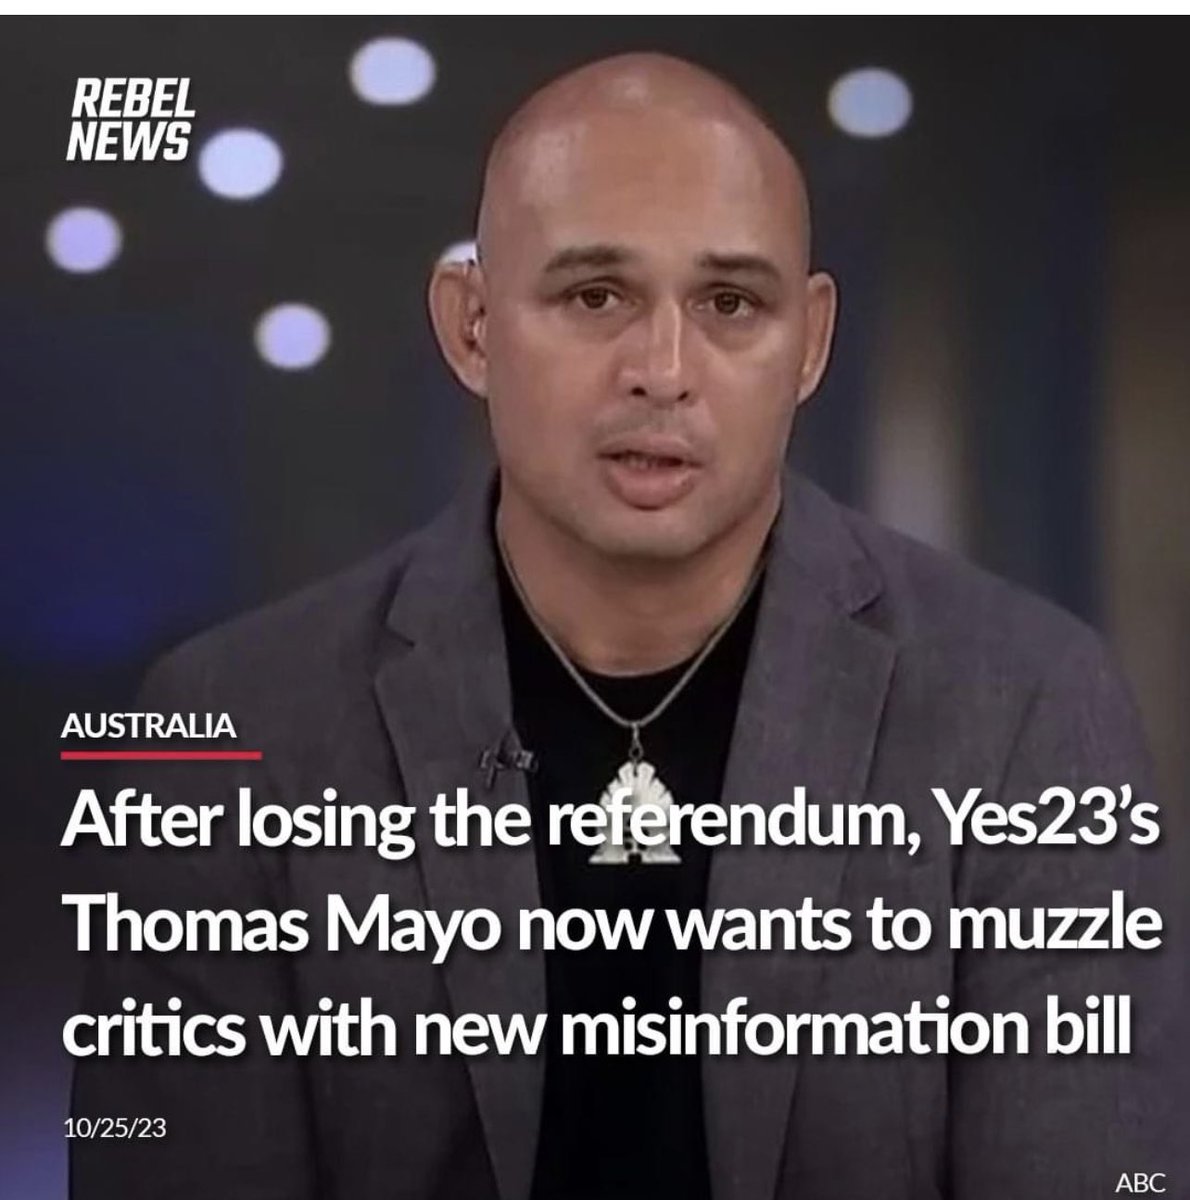 And there we have it….

After losing the referendum, Yes23’s Thomas Mayo now wants to muzzle critics with new misinformation bill

Indigenous Voice advocate calls for harsh social media censorship regulations following overwhelming Voice to Parliament defeat.…